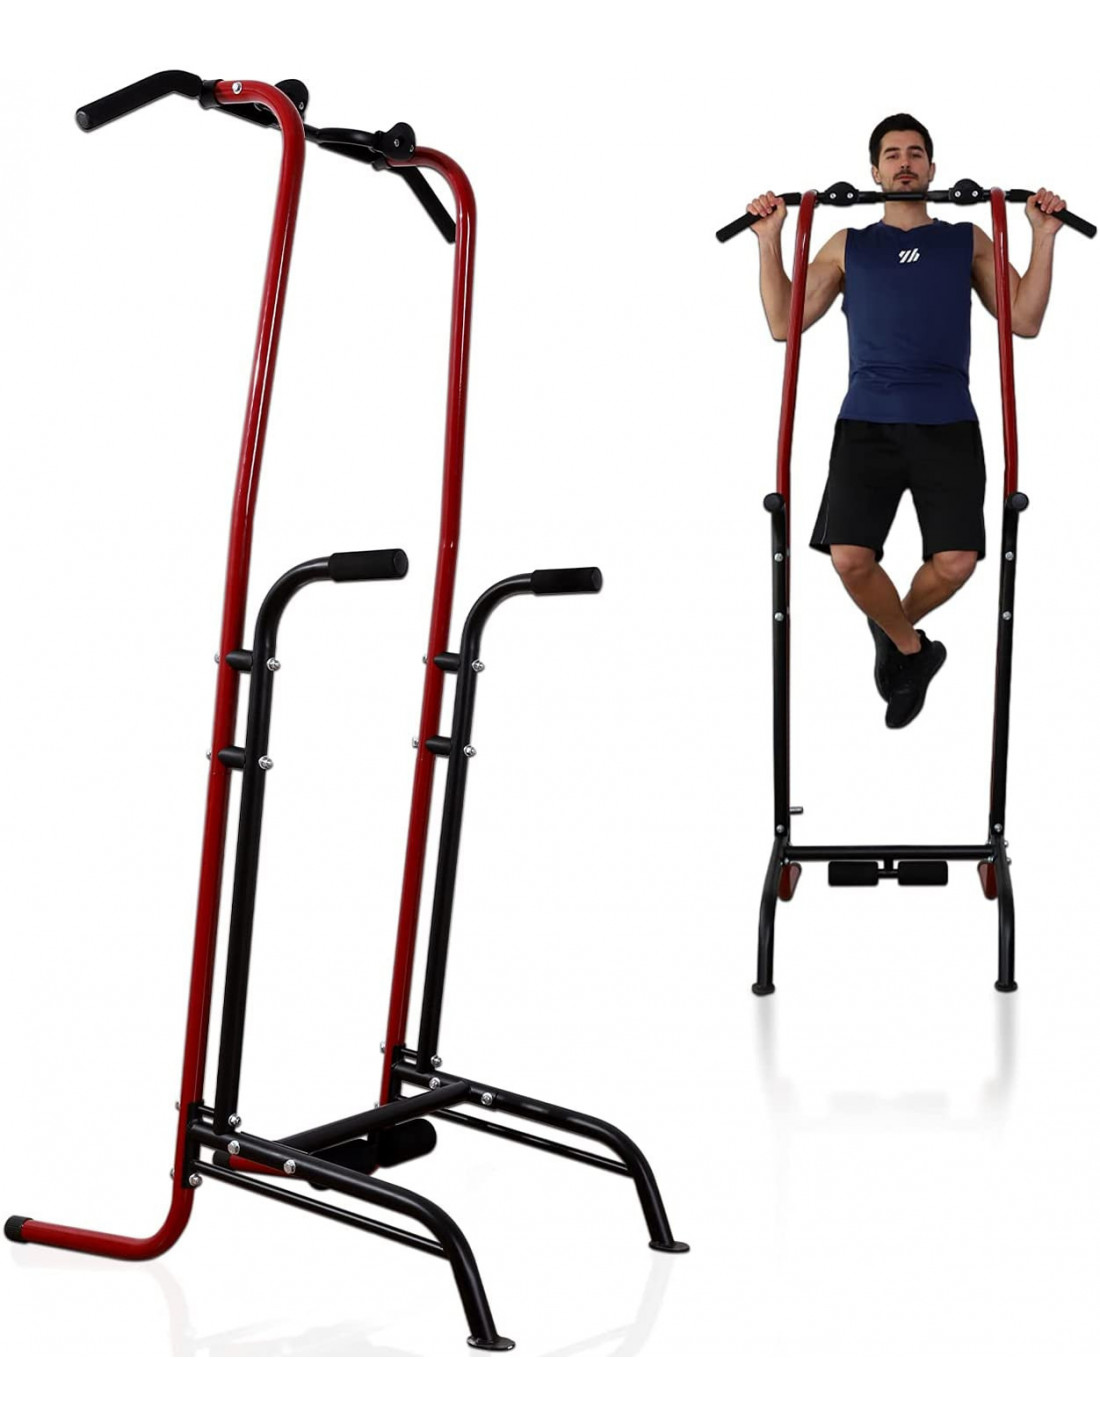 https://isefit.com/20366-thickbox_default/ise-barre-de-tractionpower-tower-multifonction-fitness-dips-station-pour-musculation-a-domicile-200kg-sy-1080.jpg